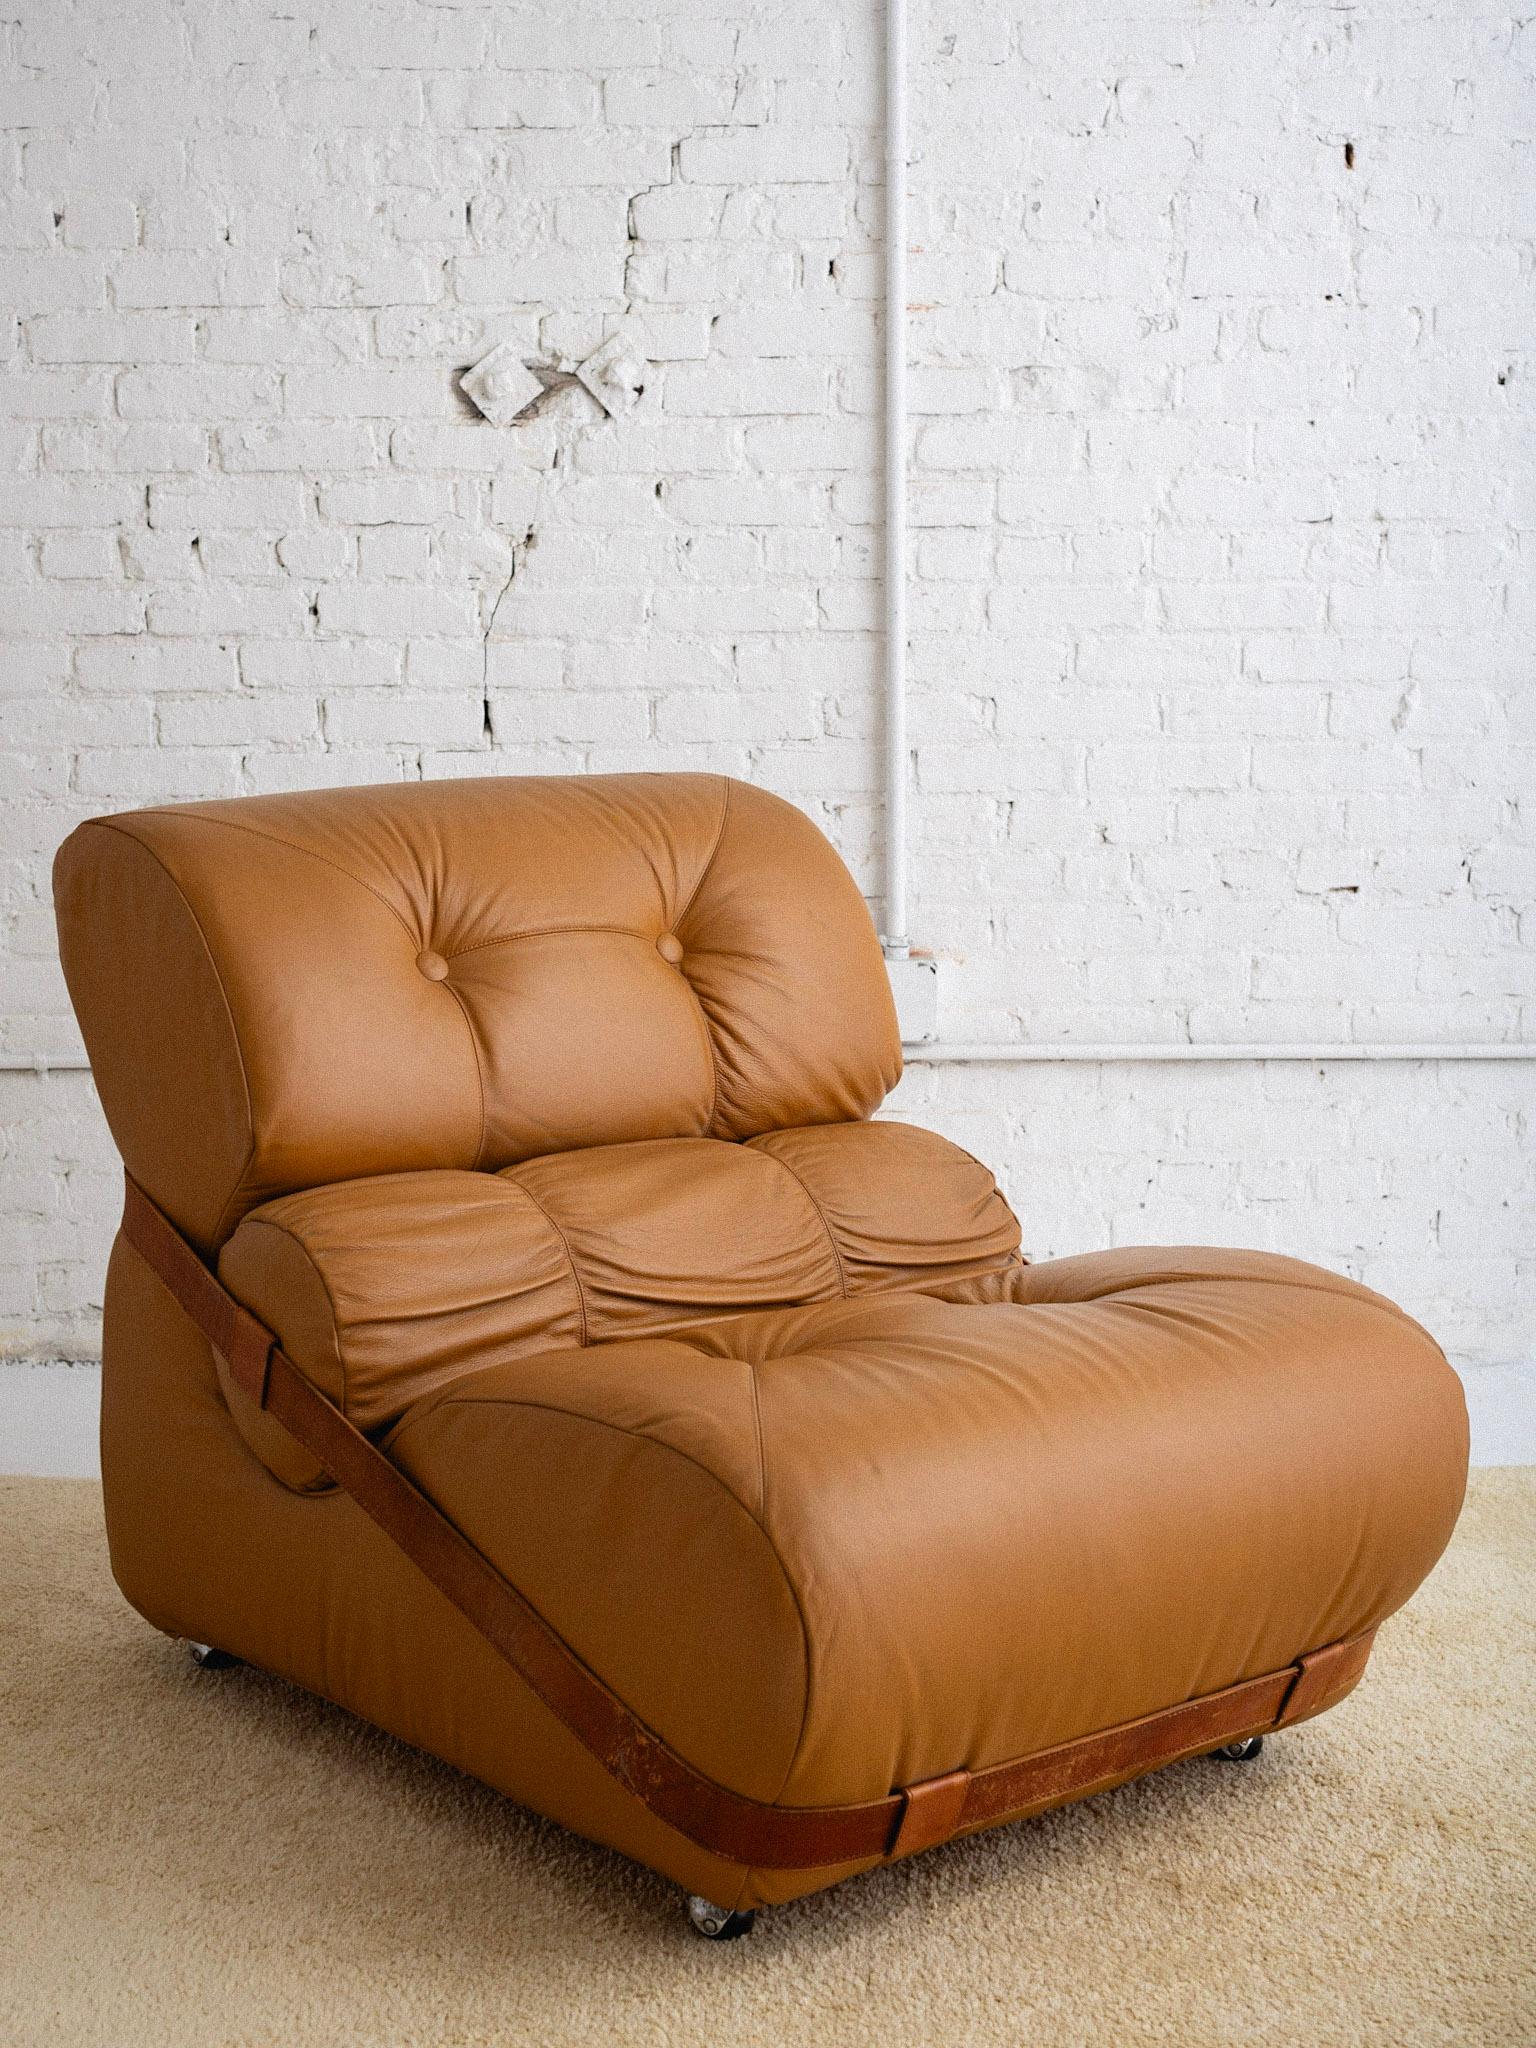 Space Age Overstuffed Italian Leather Lounge Chair & Ottoman For Sale